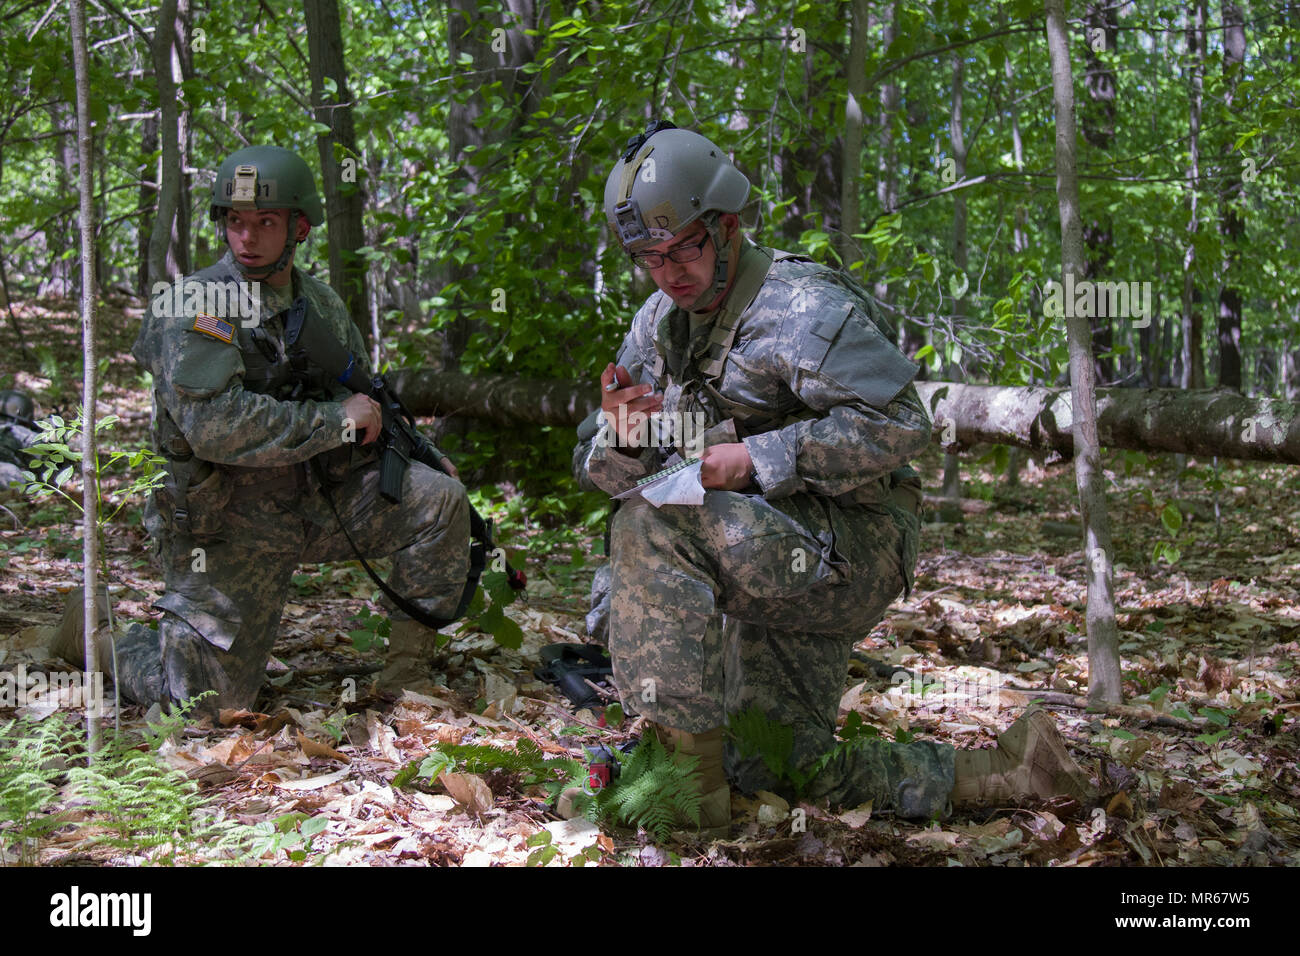 A U.S. Army officer candidate acting as squad leader sends up a SALUTE report during a bunker clearing lane at New Hampshire National Guard Training Site in Center Strafford, Nh., May 19, 2017. Soldiers from Connecticut, Maine, Massachusetts, New Hampshire, New Jersey, New York, Rhode Island, and Vermont participated in the Officer Candidate School Field Leadership Exercise in preparation for graduation and commission. (U.S. Army National Guard photo by Spc. Avery Cunningham) Stock Photo